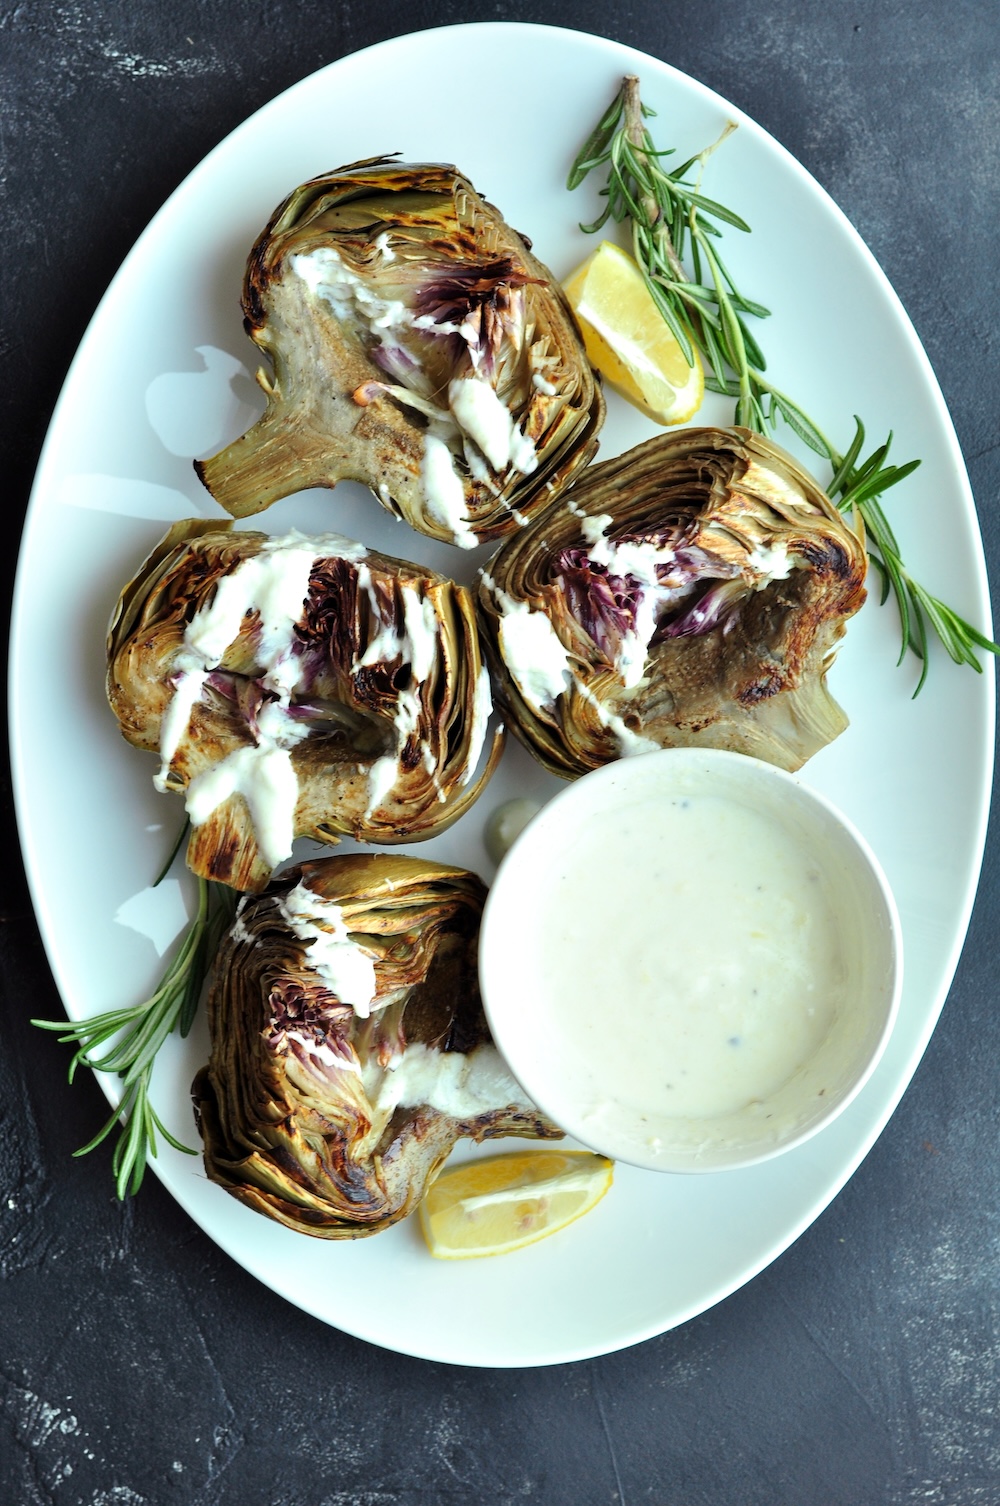 These beautifully tender sous vide artichokes are a versatile choice as either a sophisticated appetizer or a refined side dish for your main courses. Serve them with a homemade yogurt dipping sauce—its creaminess and hint of zest complement the subtle, earthy flavor of the artichokes exquisitely.